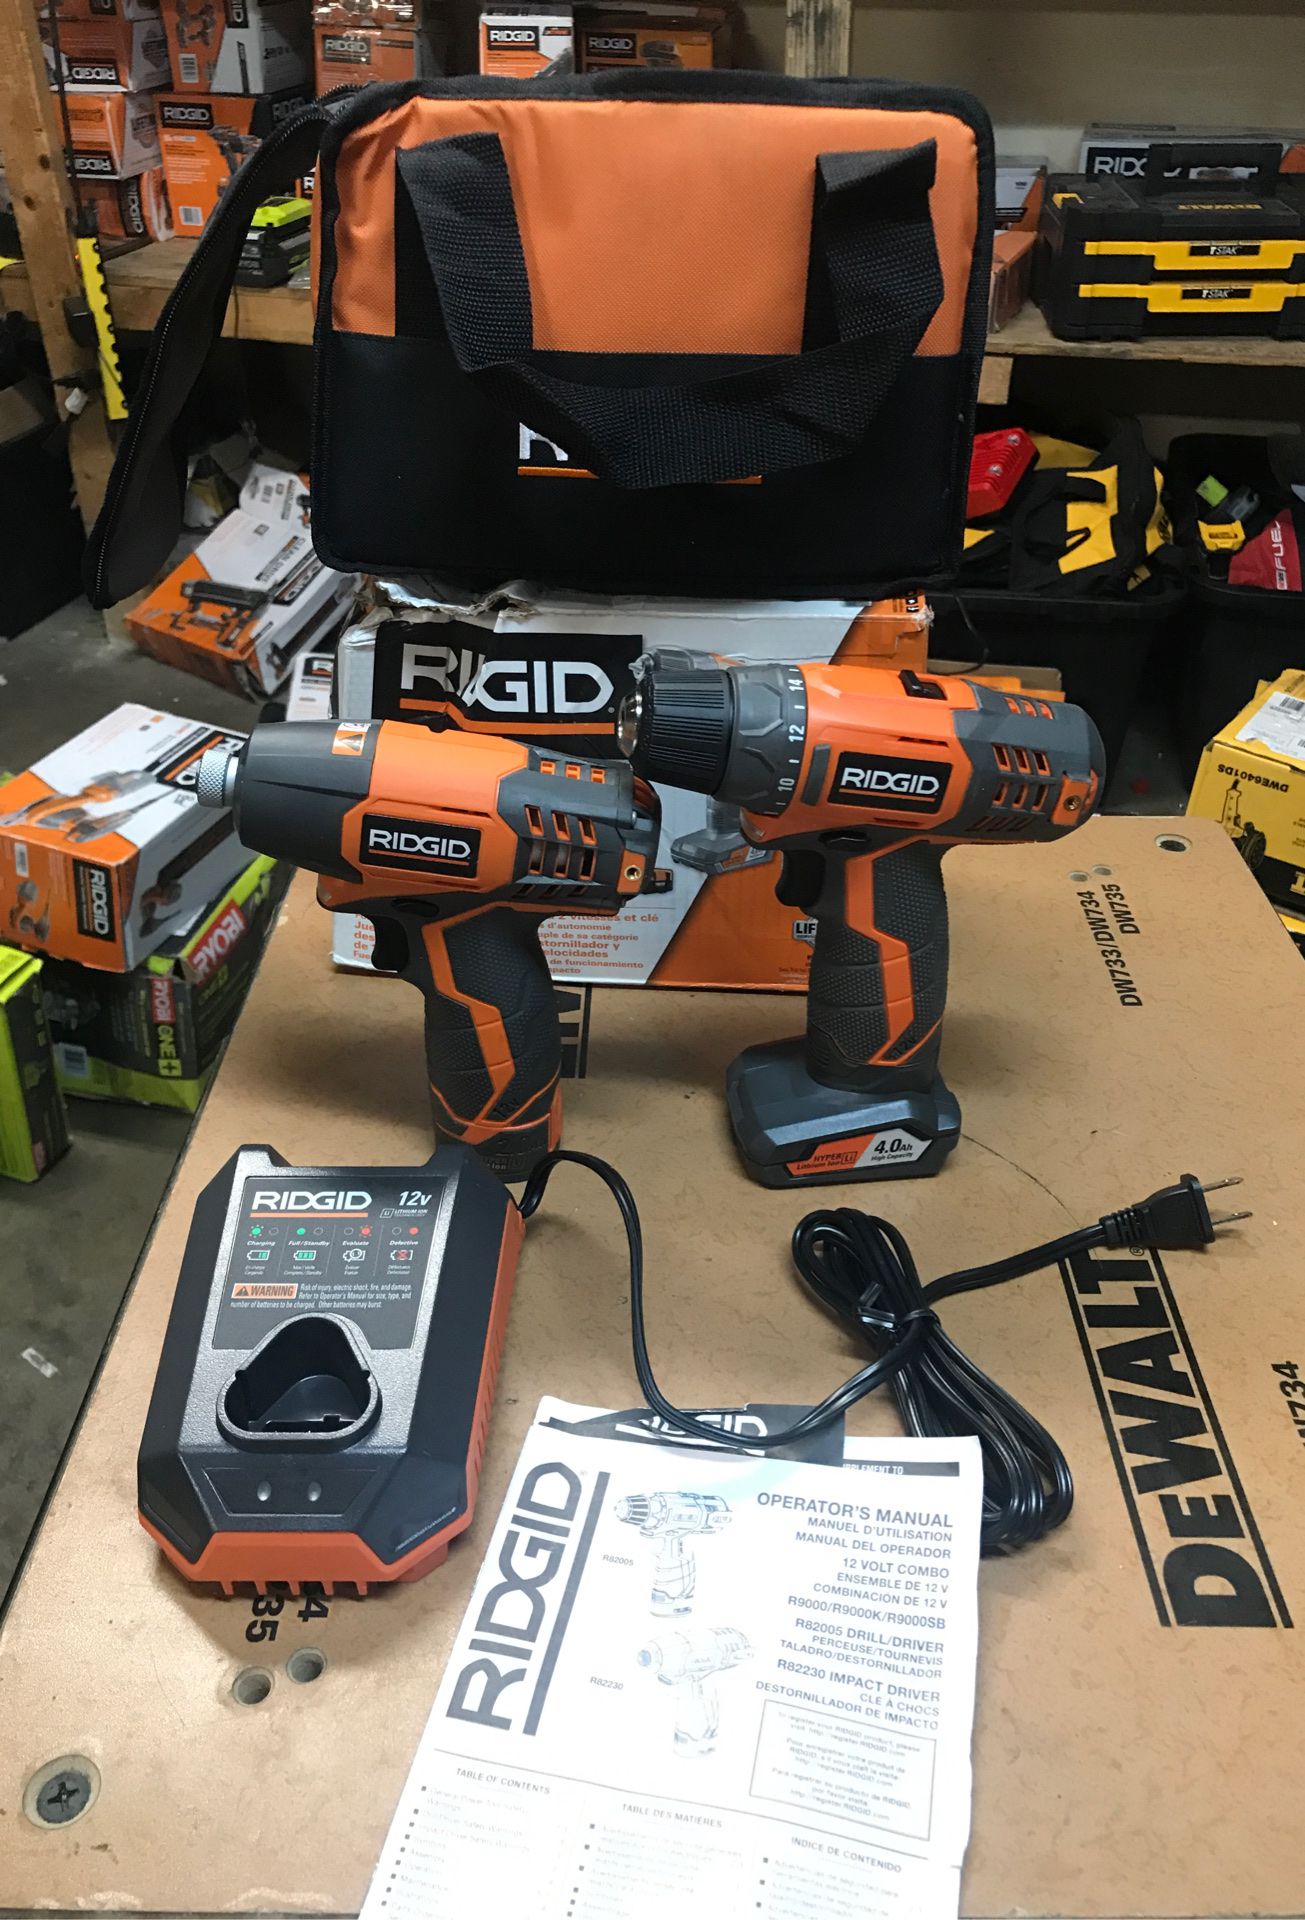 RIDGID 12-Volt Lithium-Ion Cordless Drill/Driver and Impact Driver Combo Kit with 2-Batteries, Charger and Bag